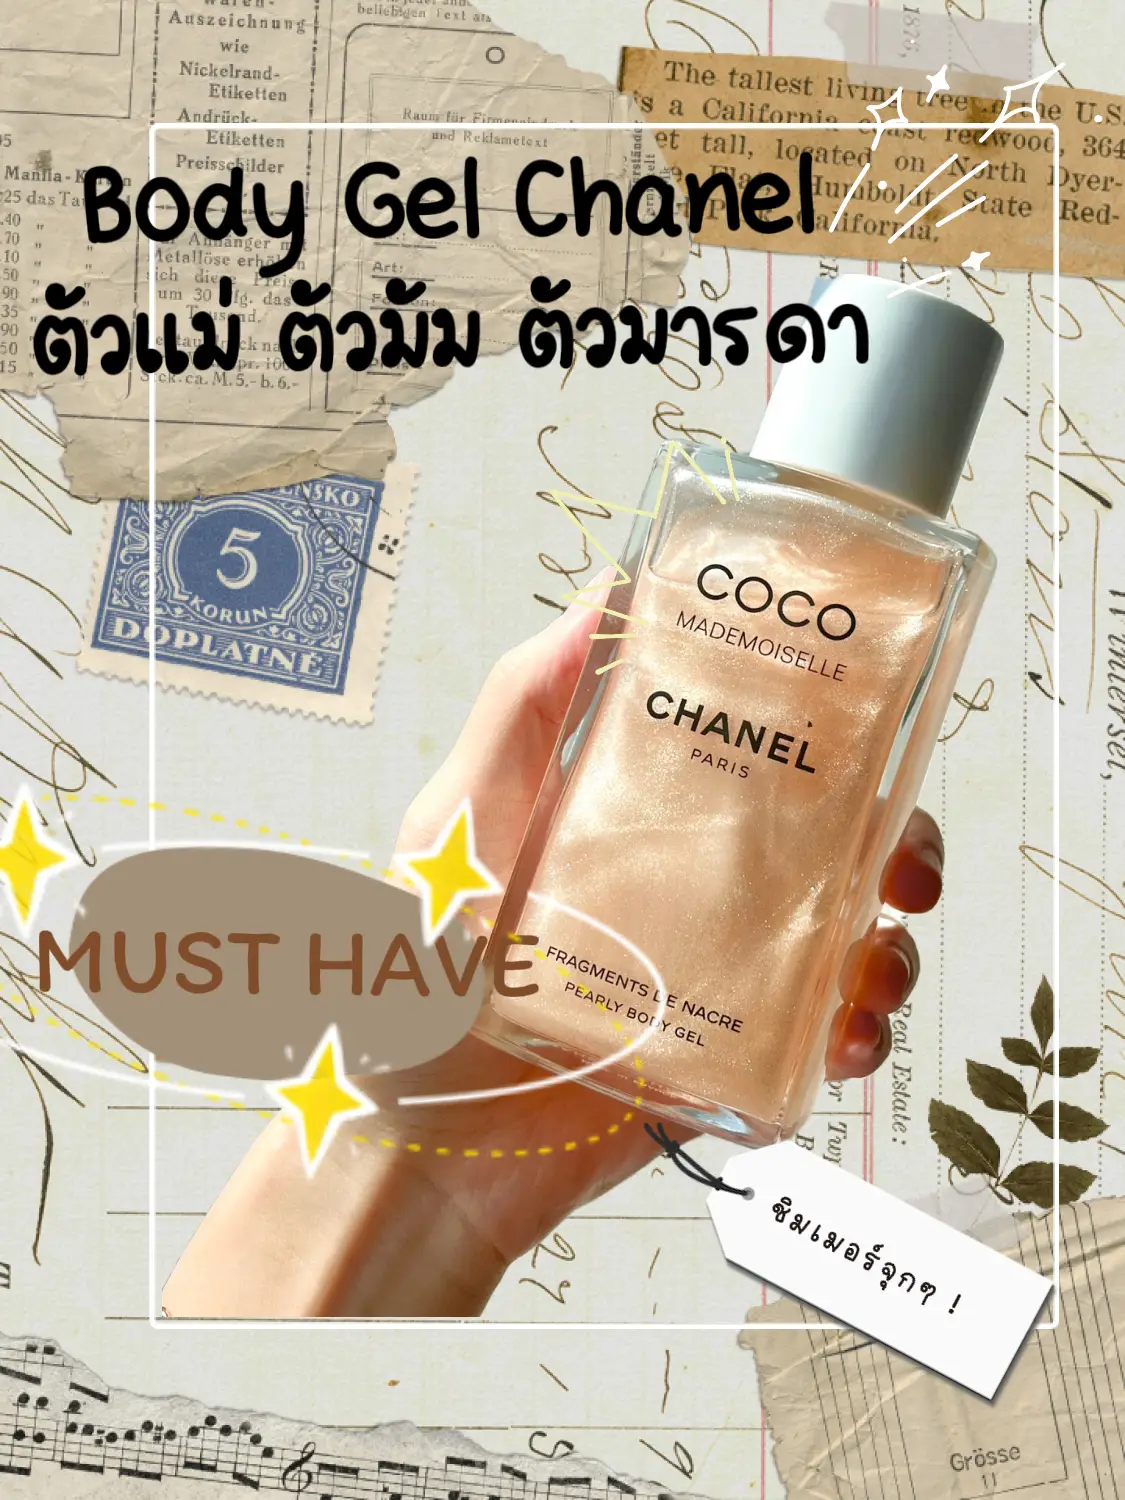 Famous Coco Chanel Body Gel, Gallery posted by paow.parwarin